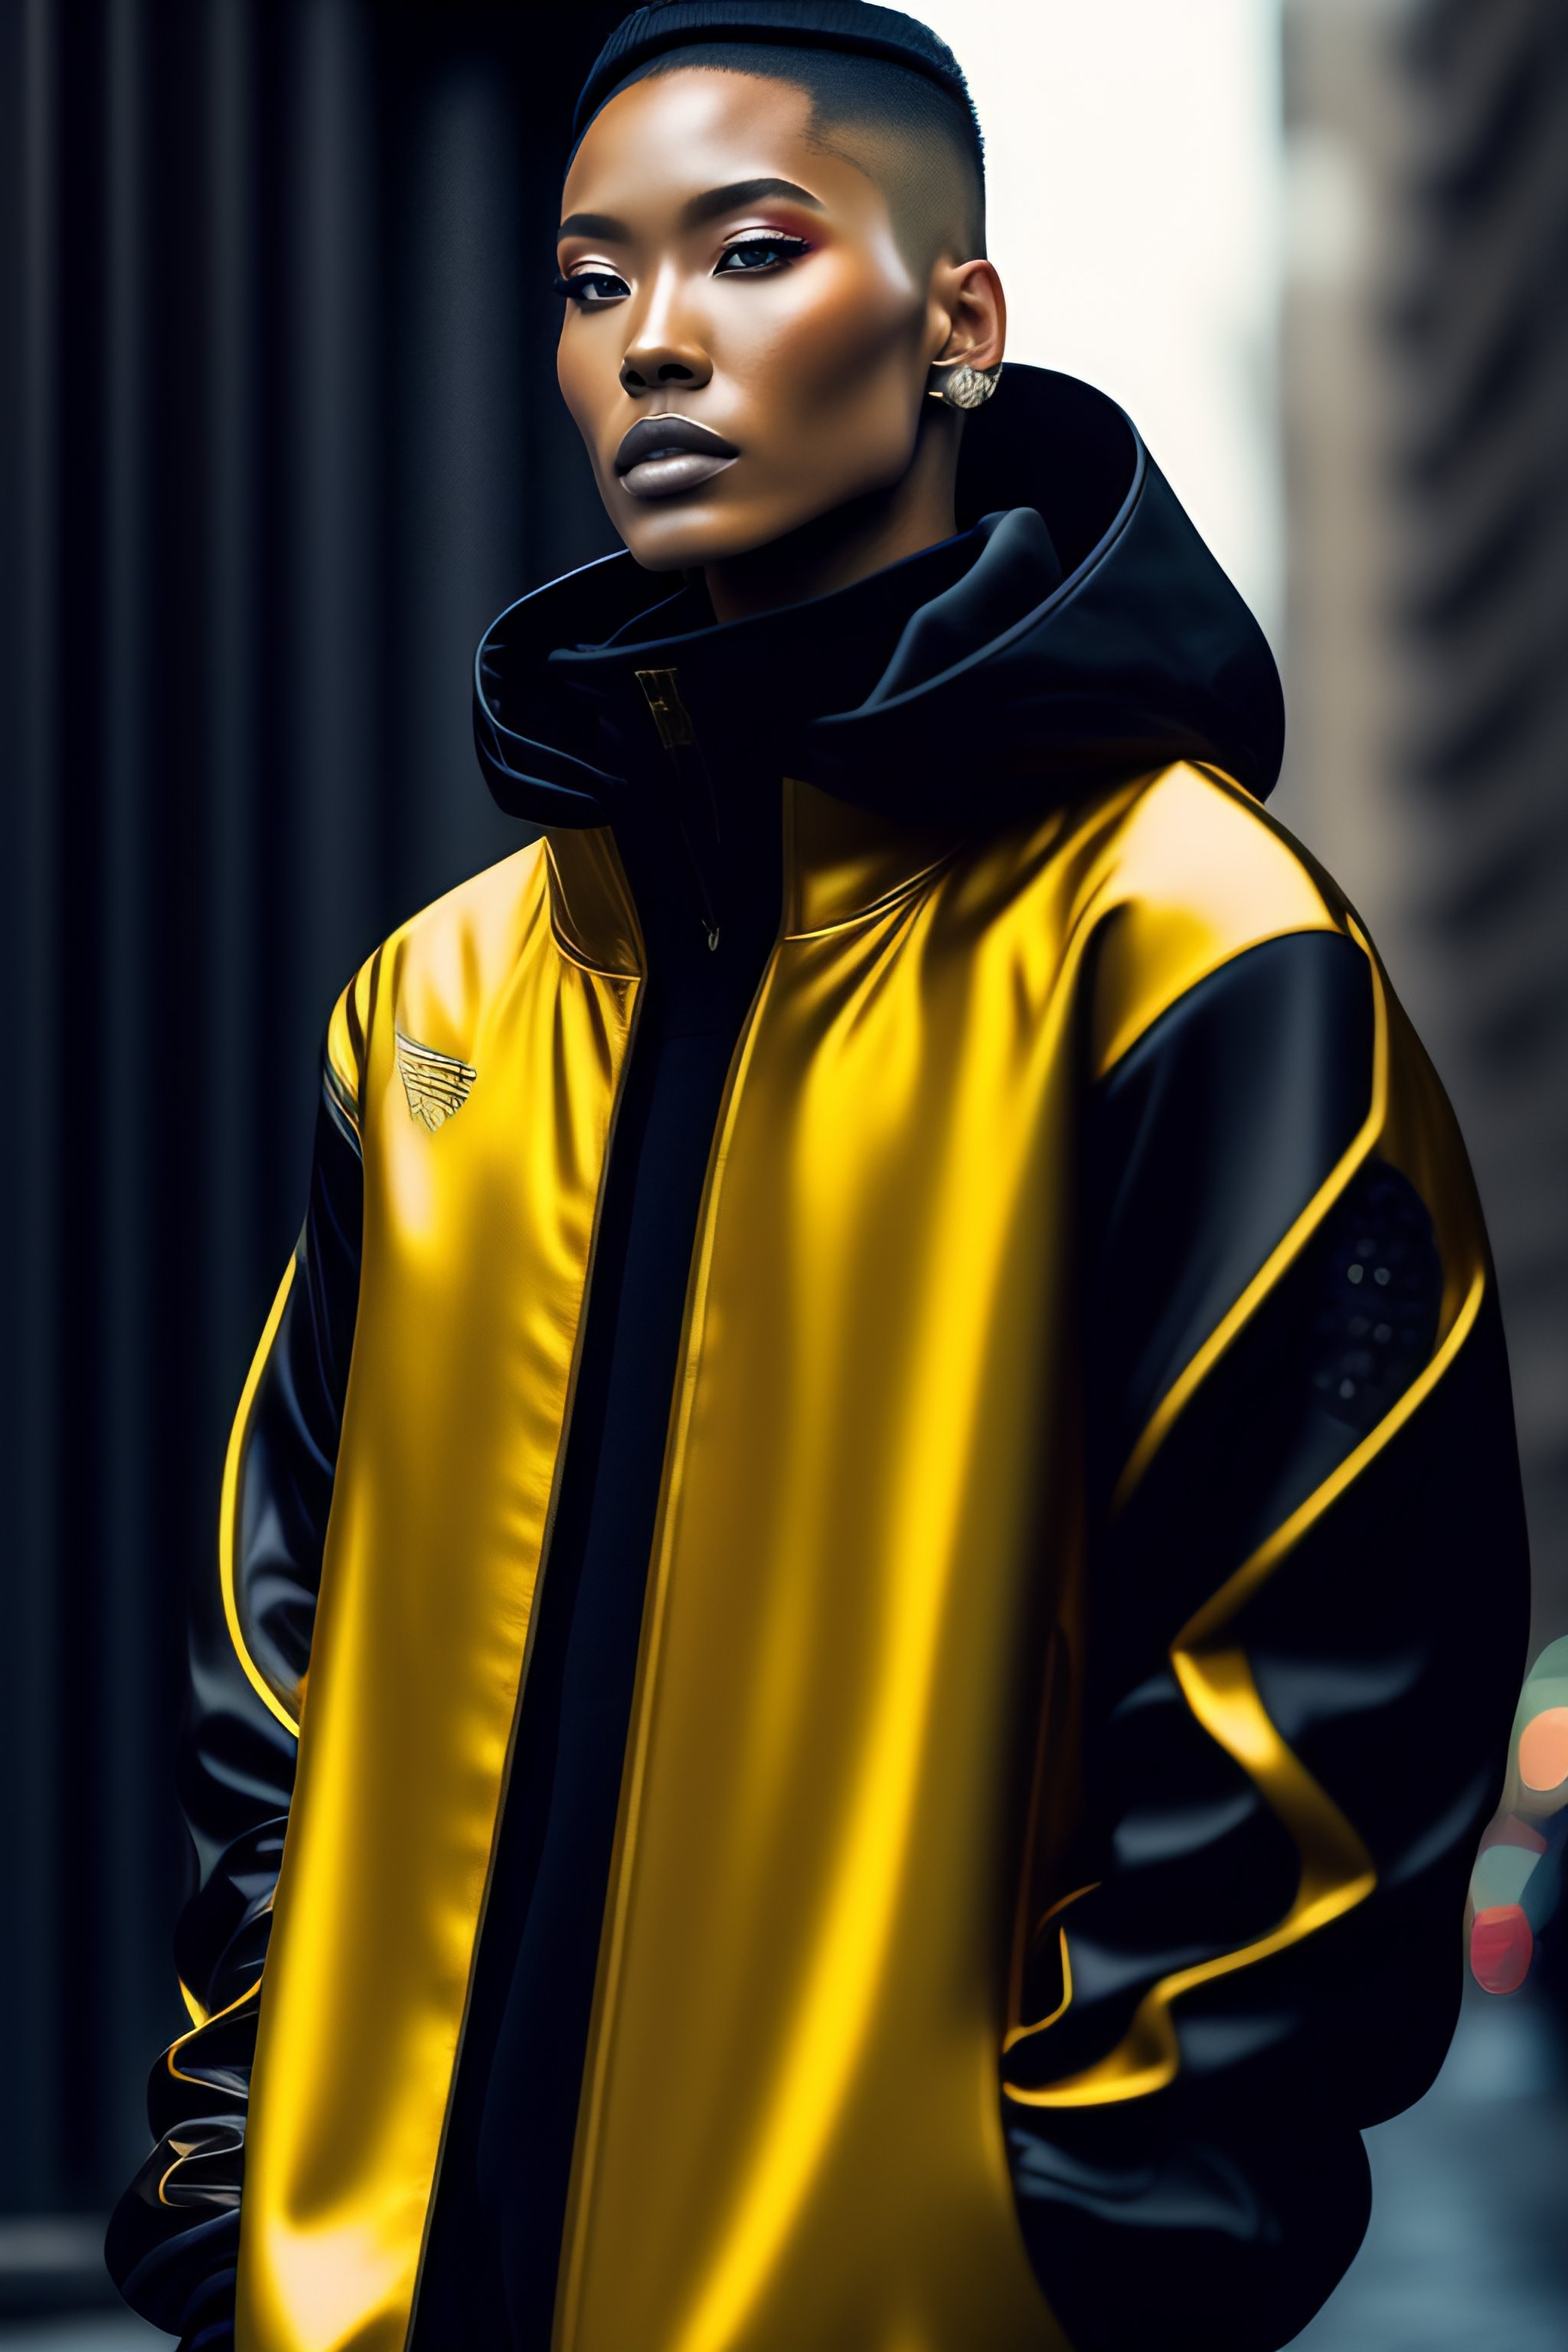 Lexica - Cyberpunk techwear streetwear look and clothes, we can 